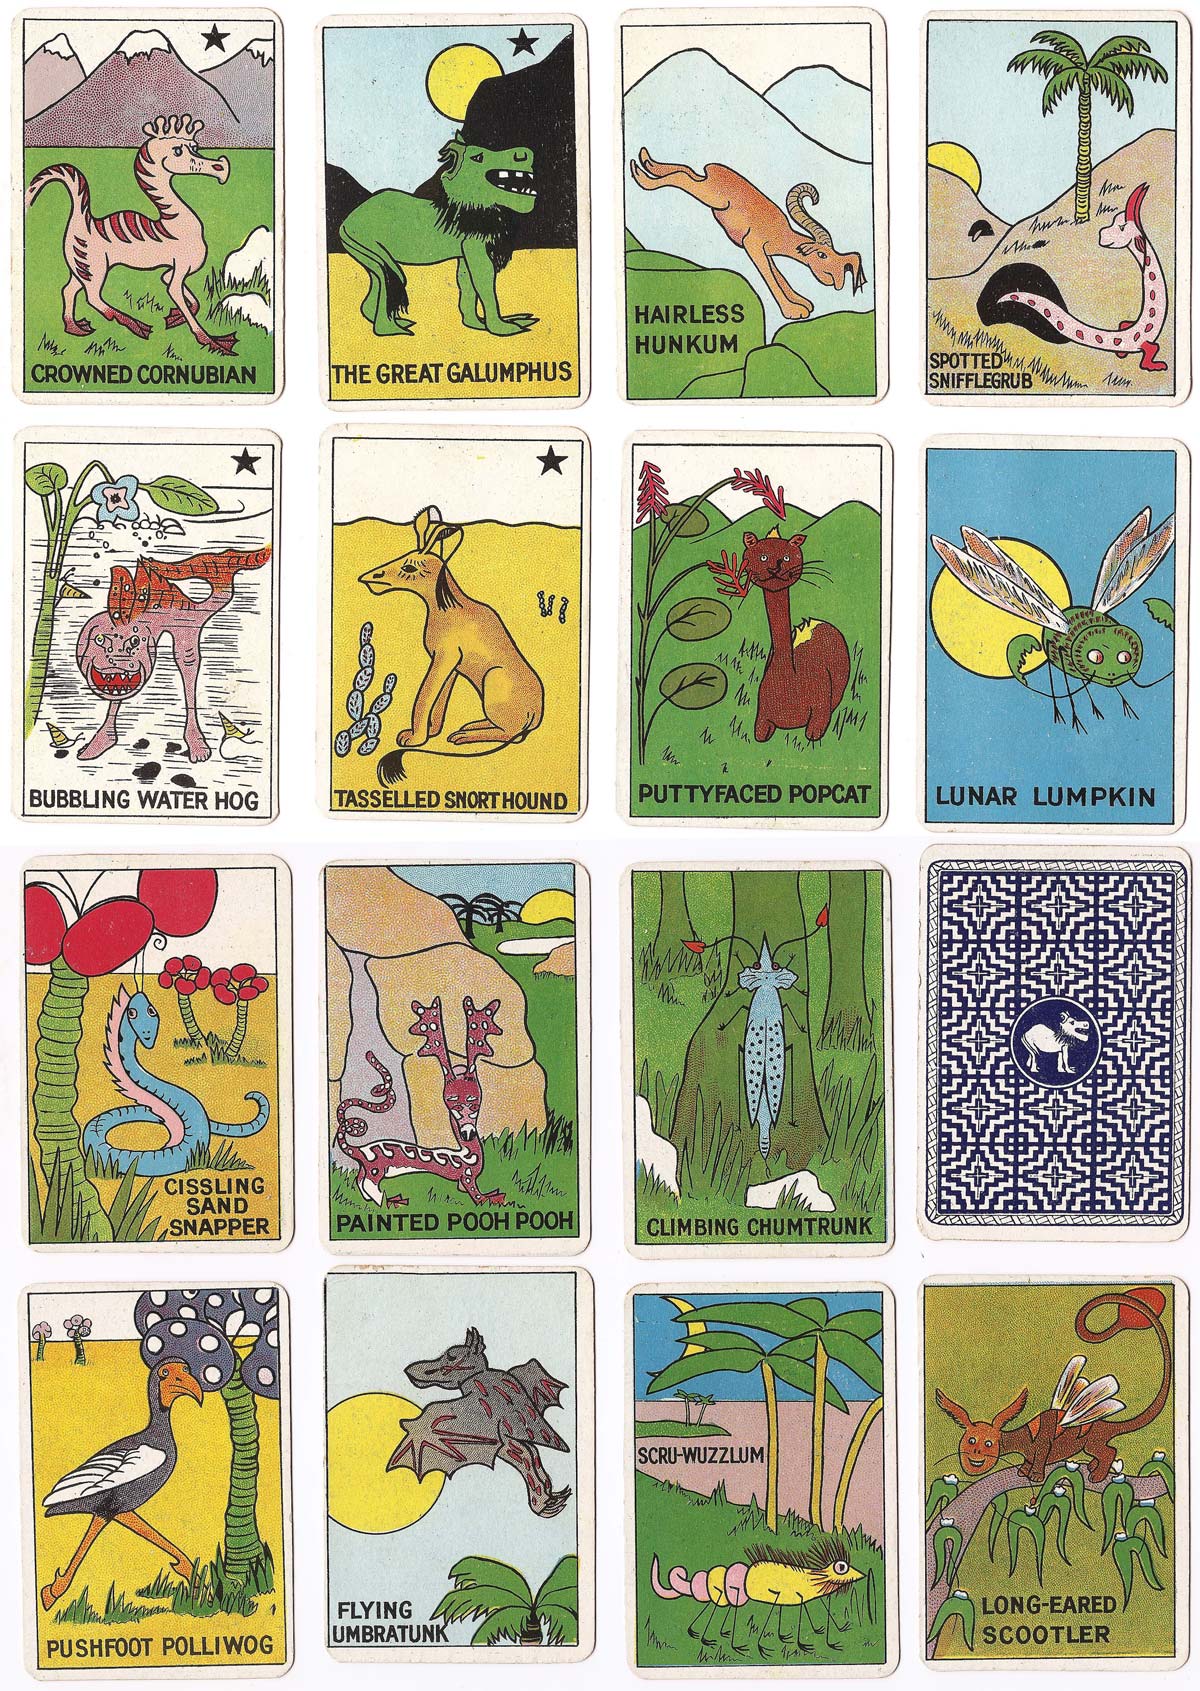 The Great Galumphus card game published by J. Jaques & Son Ltd., London, 1920s